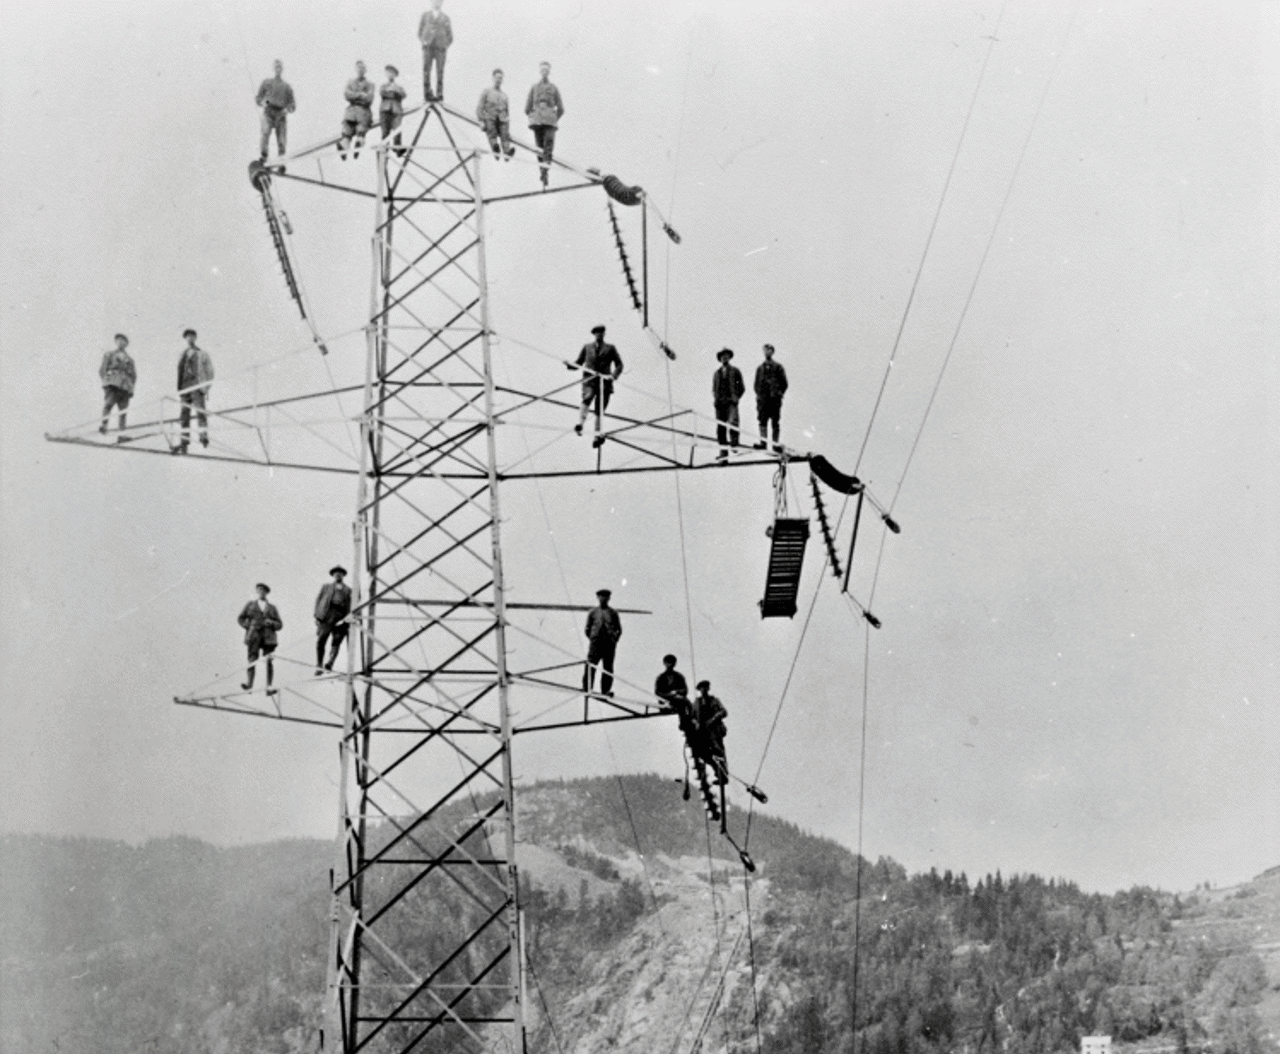 Black and white photo of men in power mast